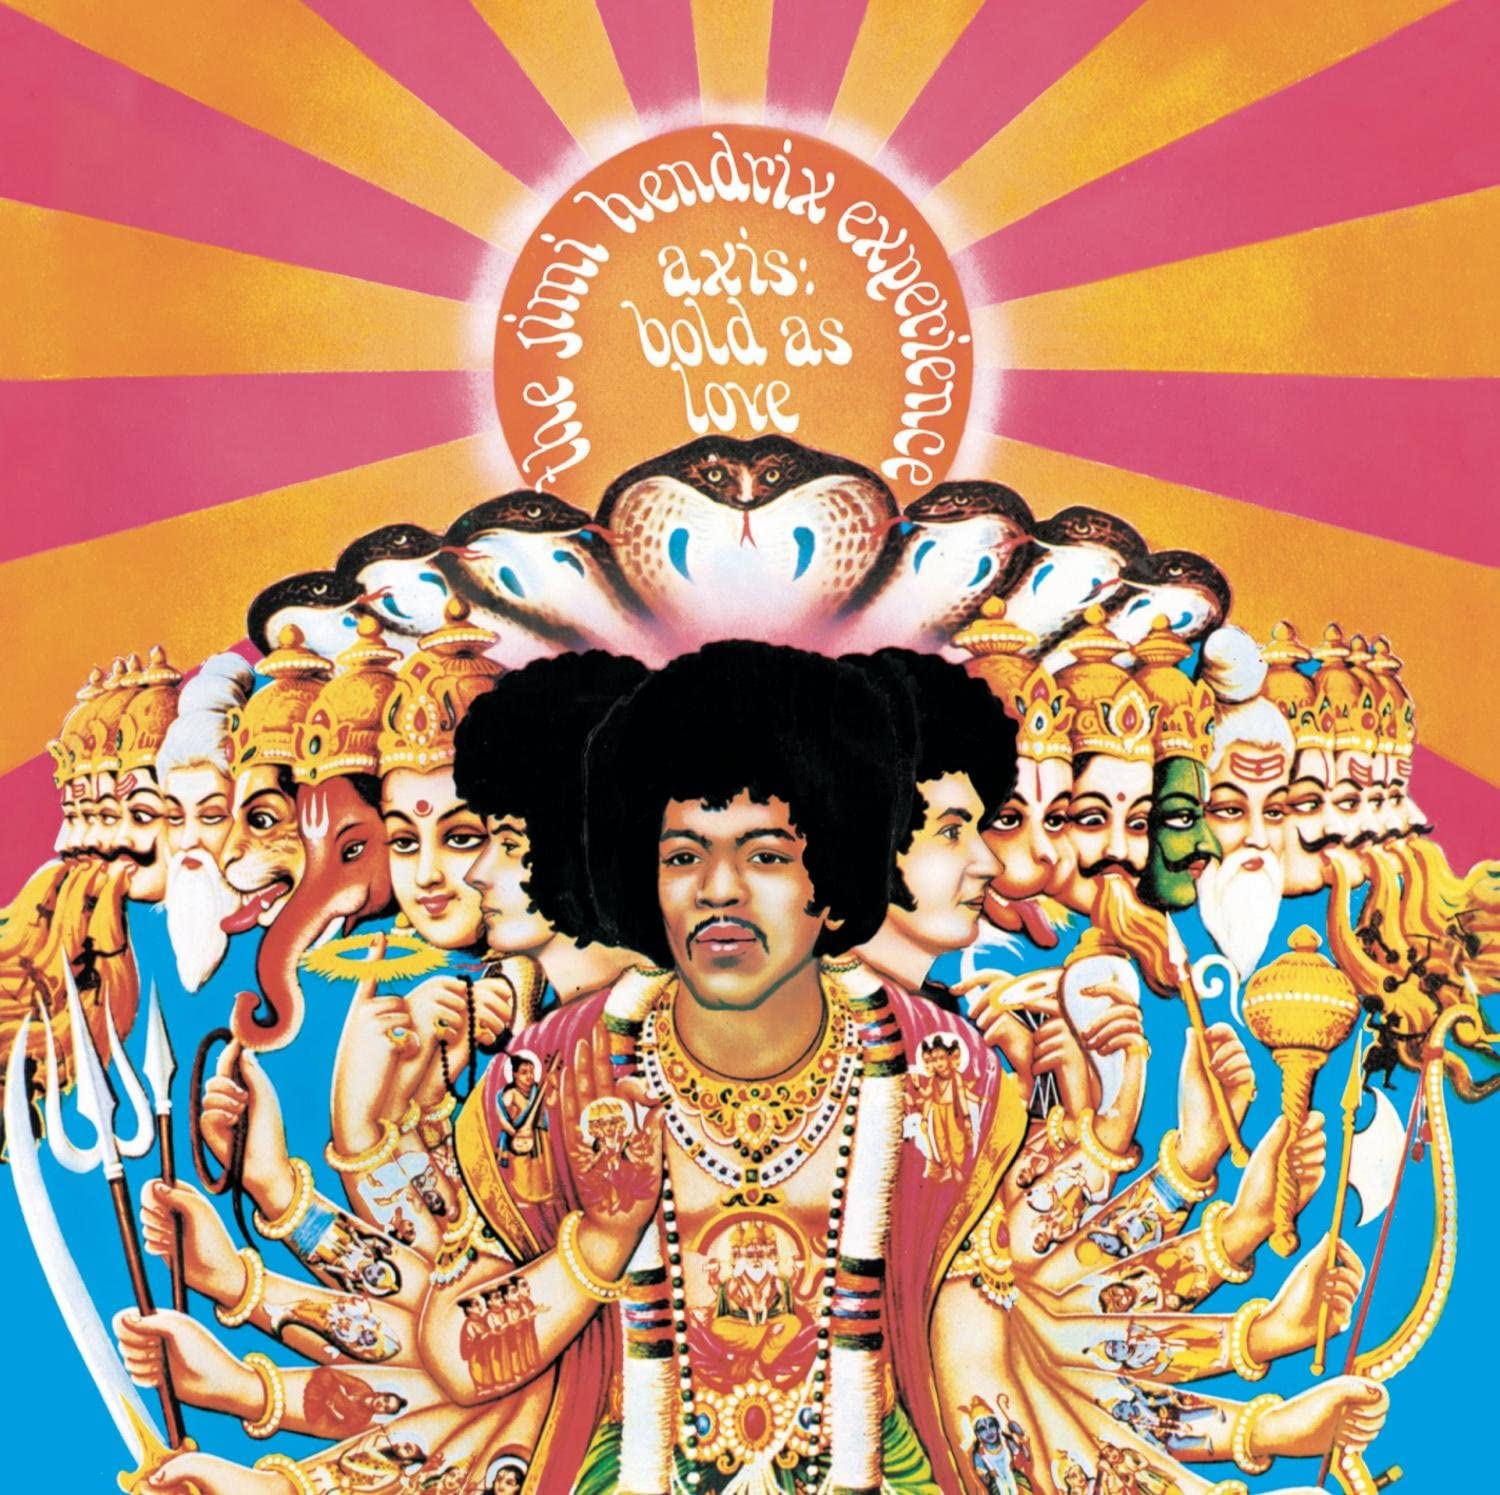 Axis: Bold as Love album cover artwork by The Jimi Hendrix Experience